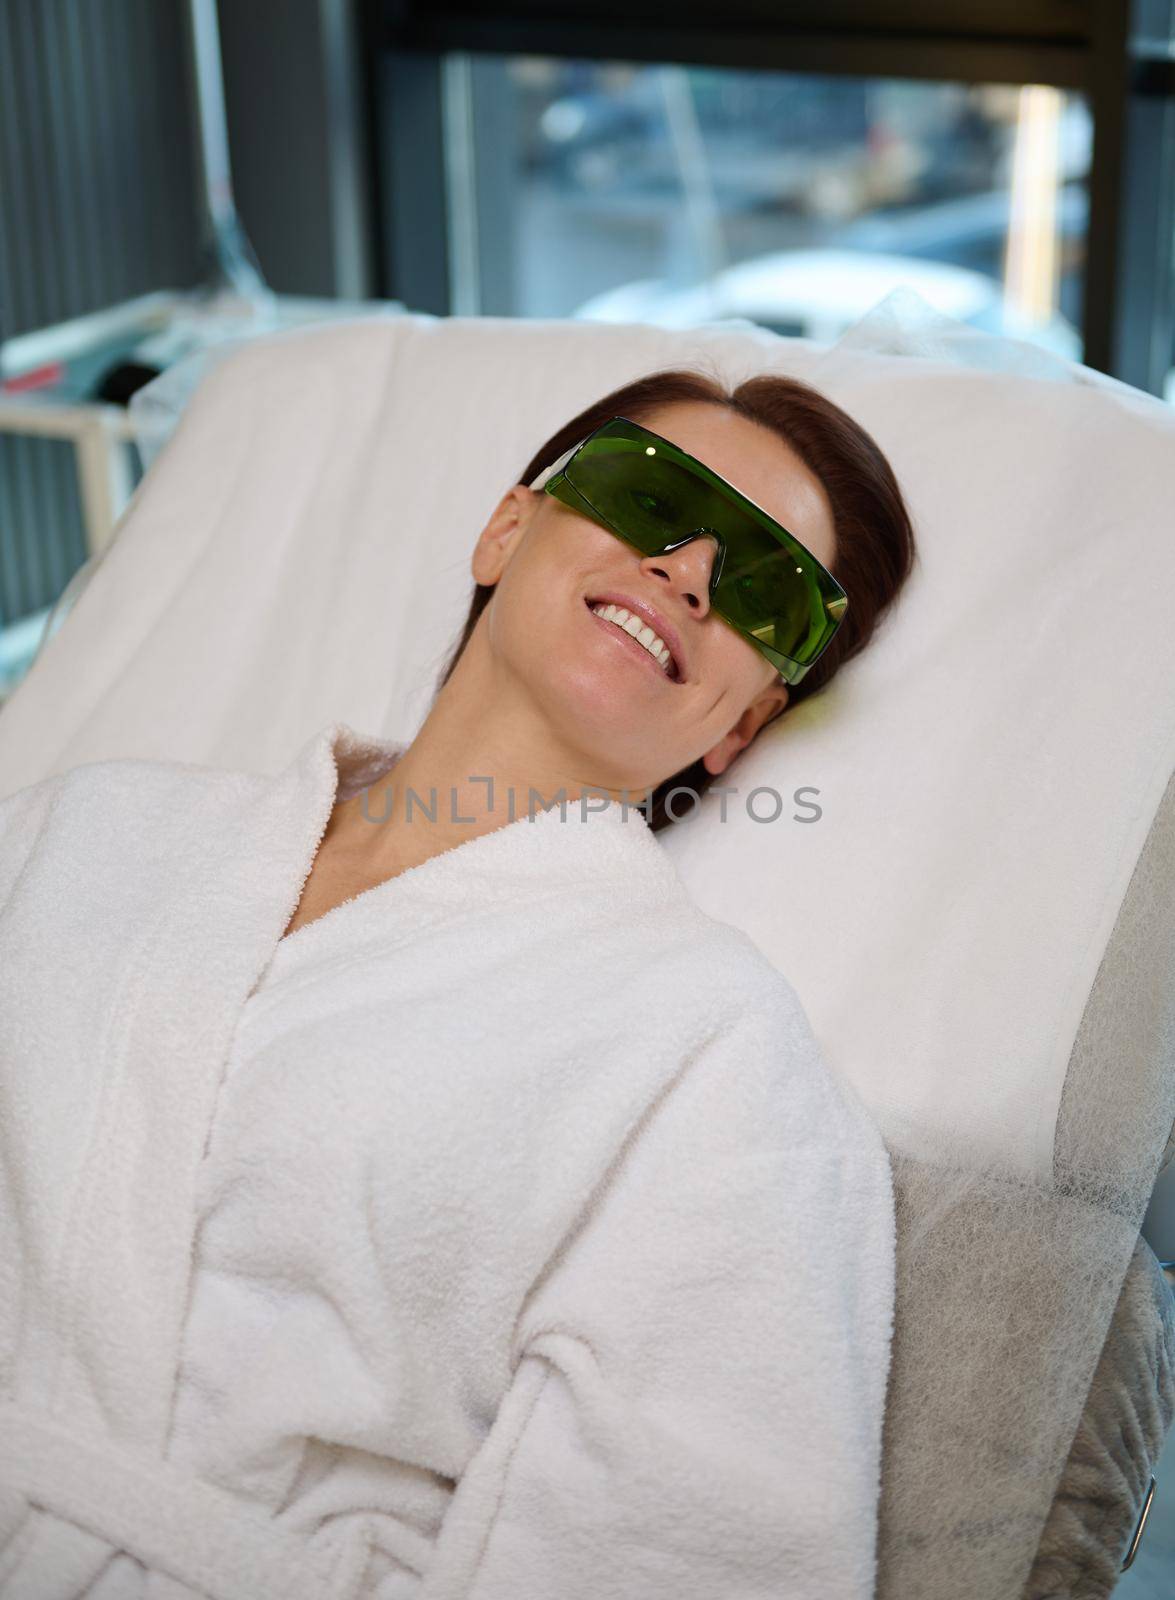 Charming middle aged woman, female patient with protective UV eye goggles, wearing a white terry bathrobe lying on a massage couch during wellness and body care procedures in modern spa resort